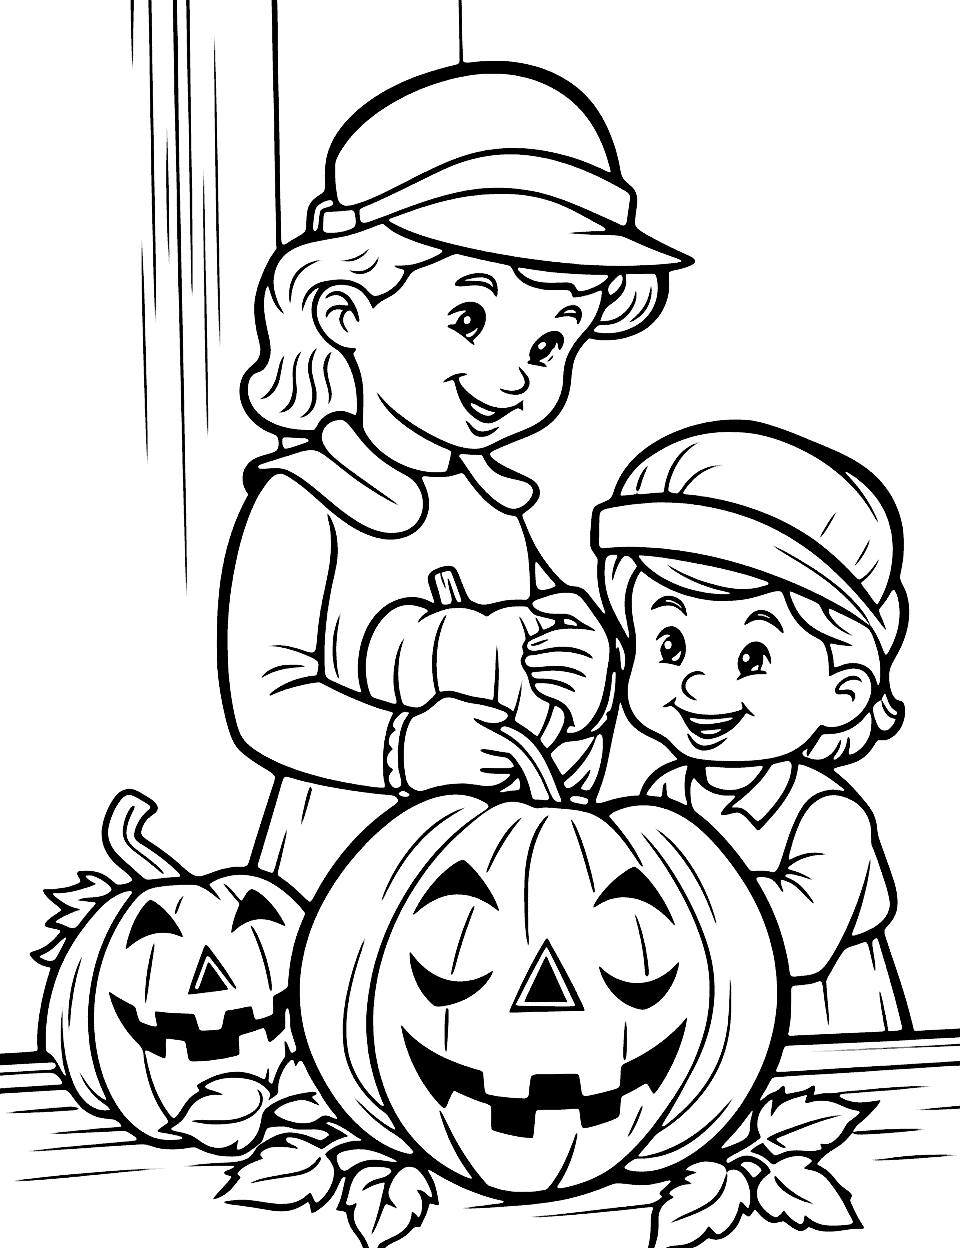 Pumpkin and Family Halloween Coloring Page - A family carrying pumpkins together, allowing kids to color the people, the room, and the pumpkins.